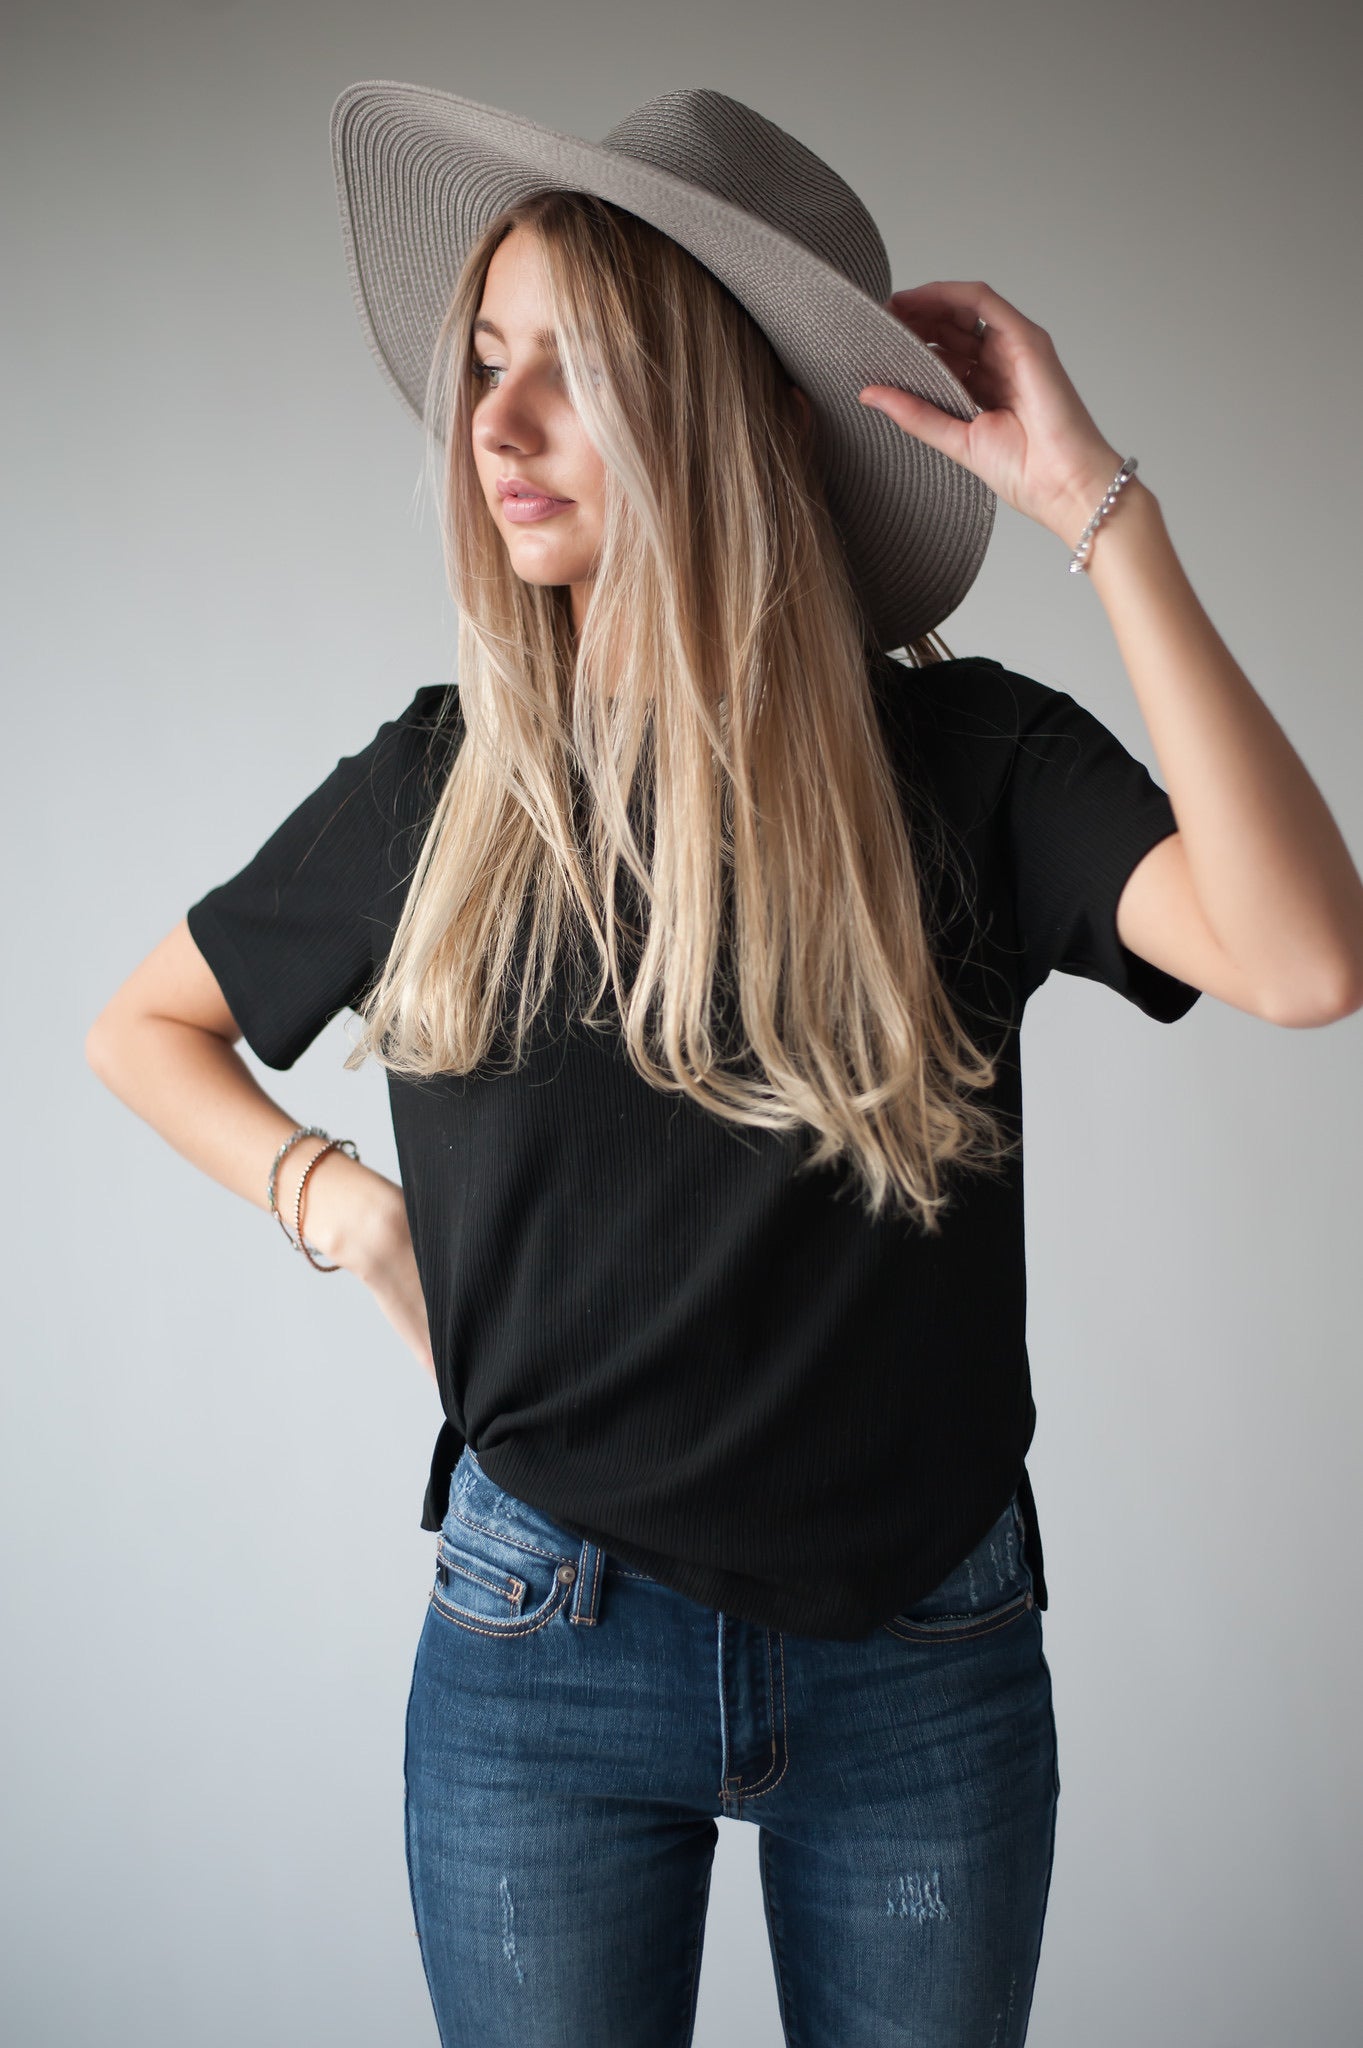 black ribbed tee, short sleeves, modest top, Duckthreads